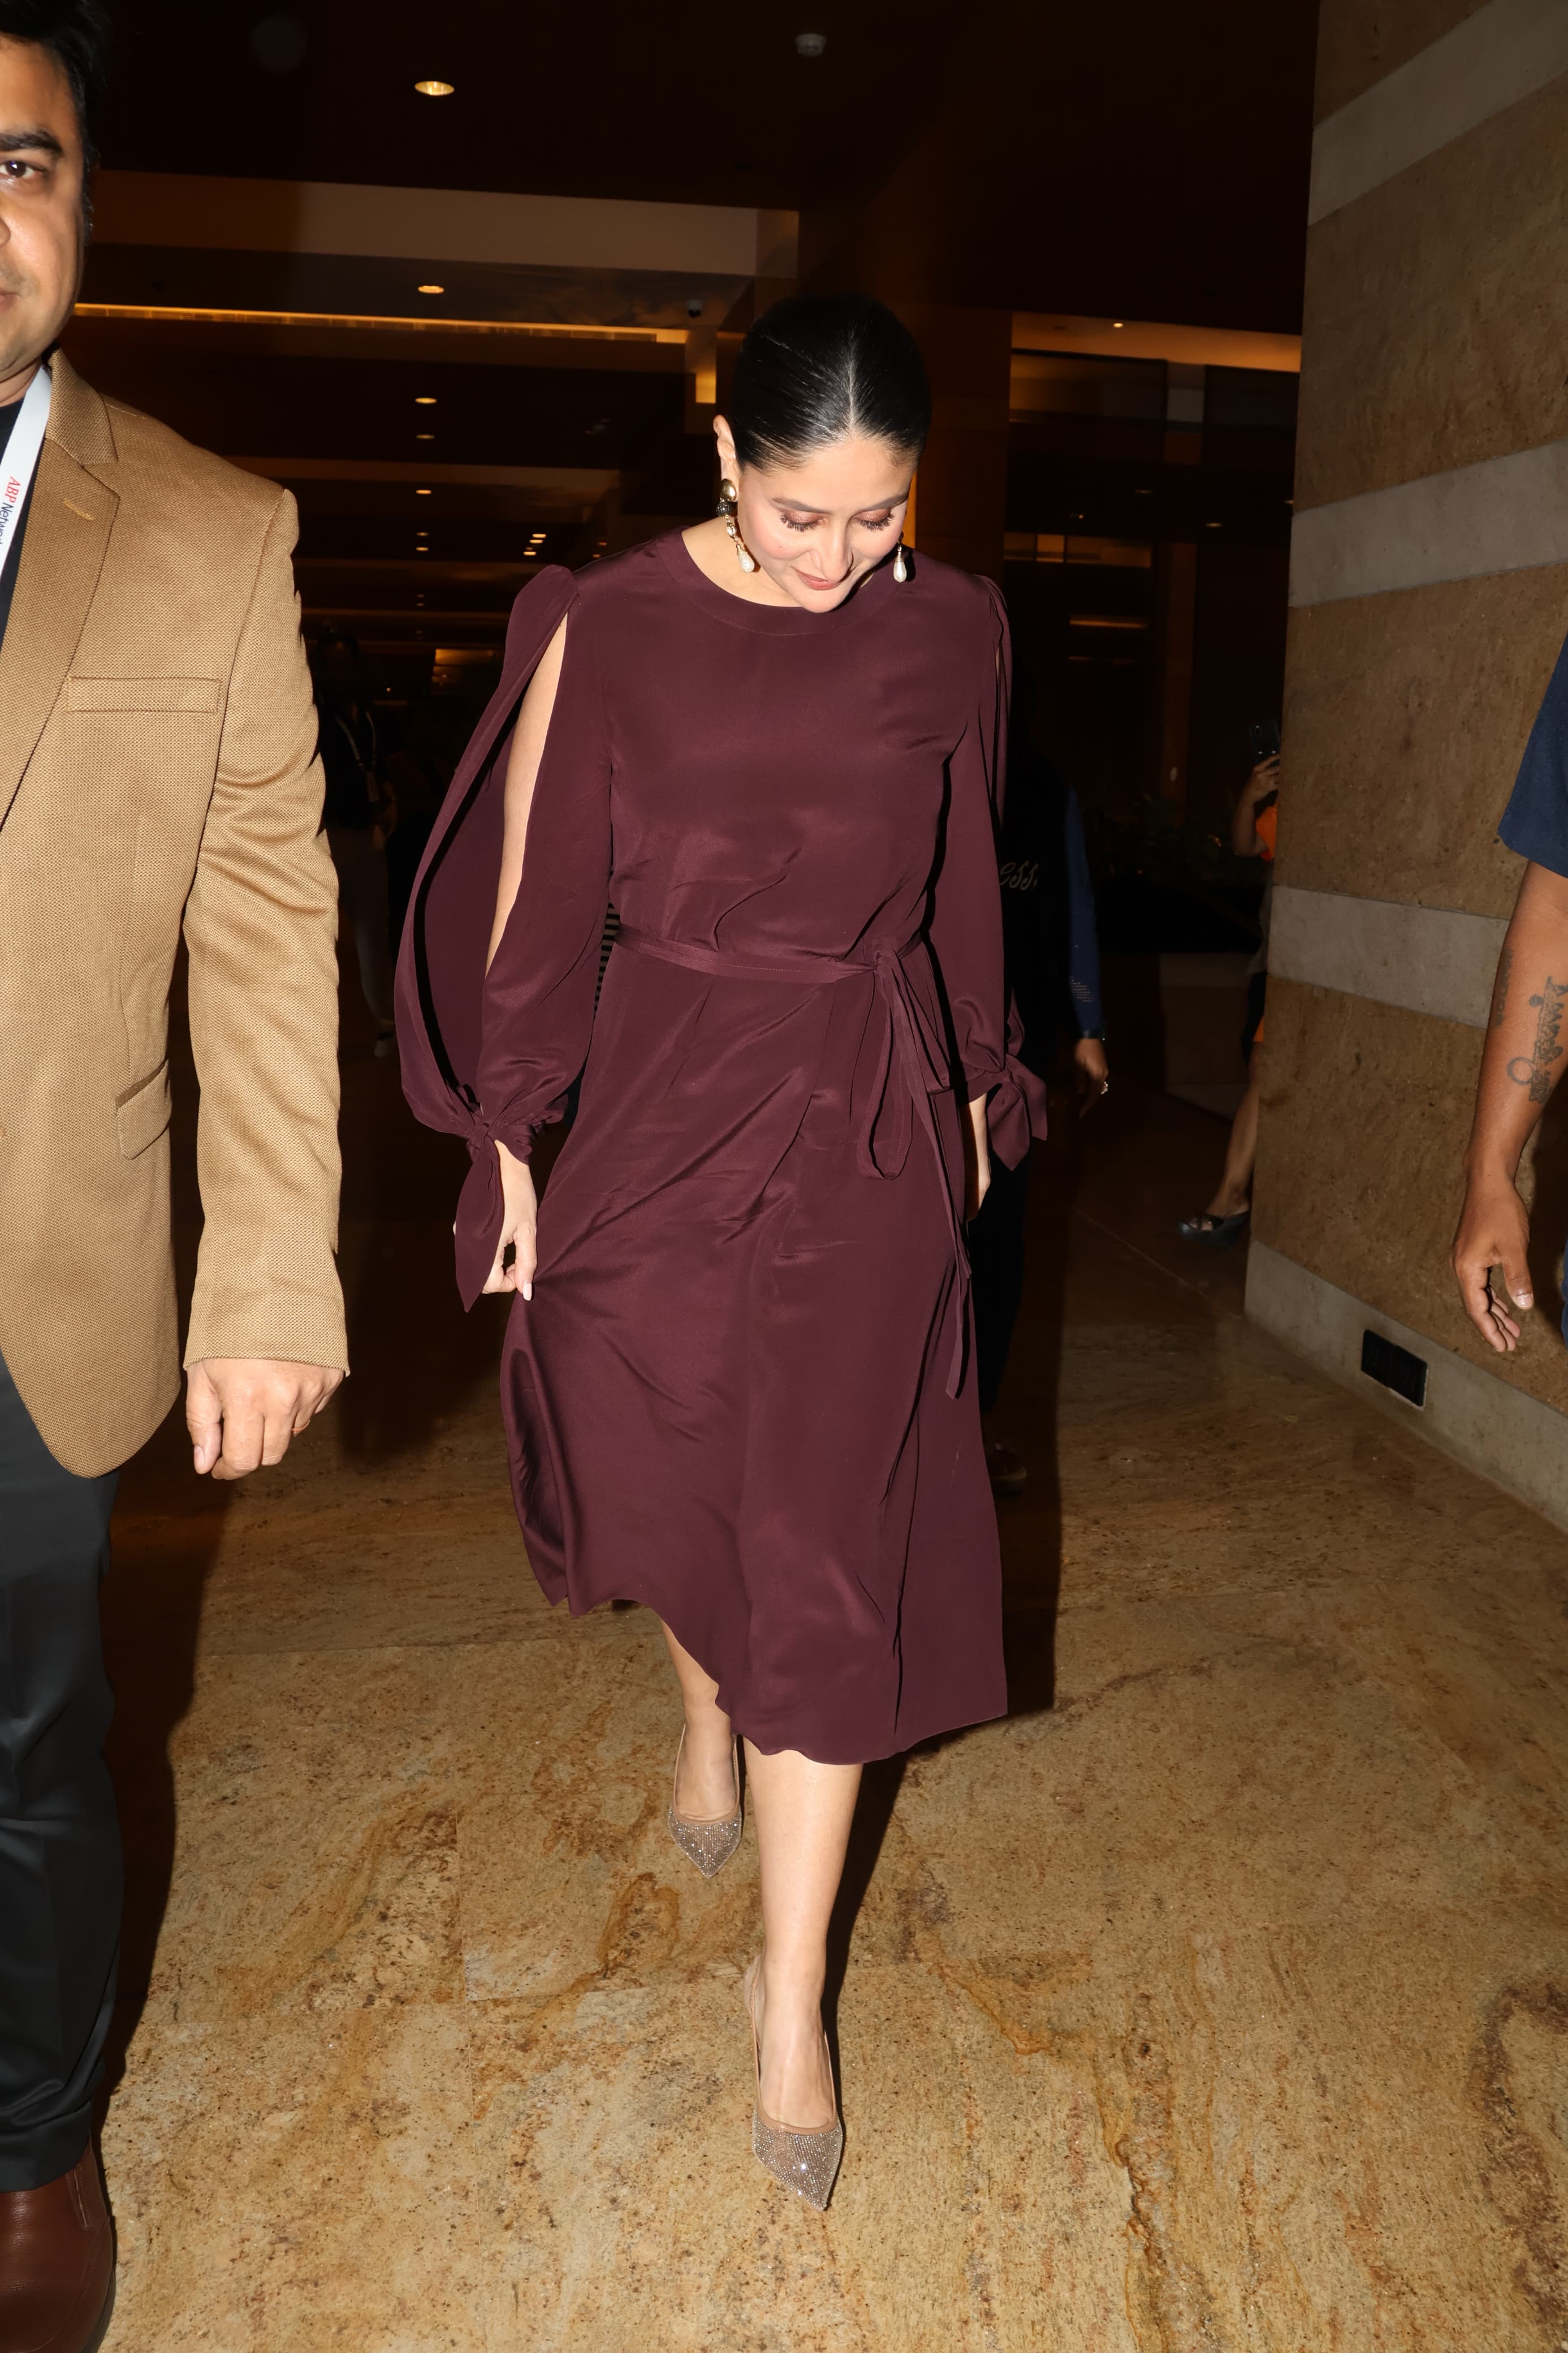 Kareena Kapoor Khan looked stunning in a burgundy dress as she went to attend an event in the city